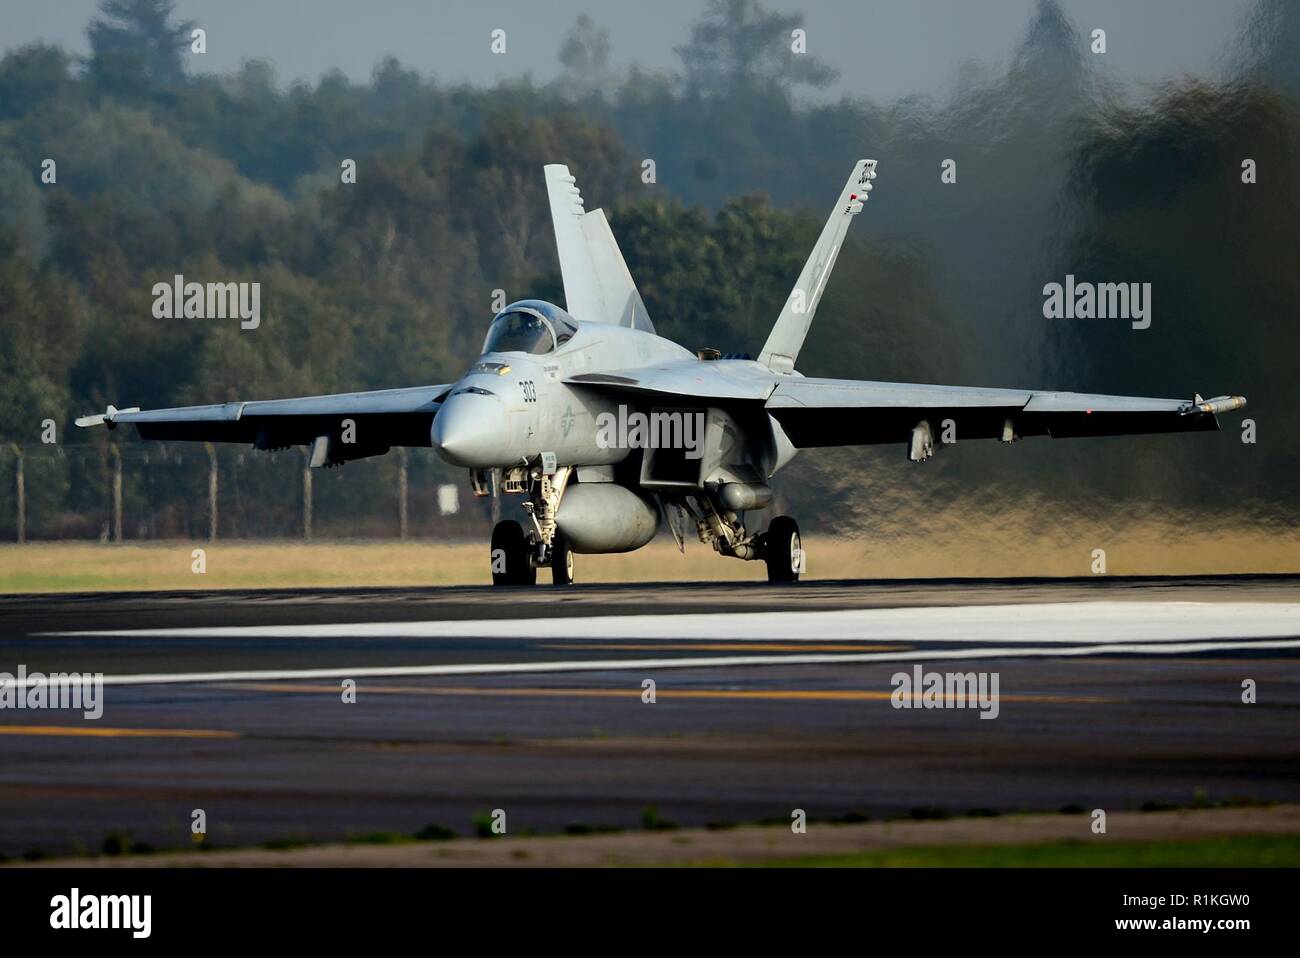 An F/A-18E Super Hornet assigned to Carrier Air Wing One (CVW-1), deployed from the Nimitz-class aircraft carrier USS Harry S. Truman (CVN 75) launches for a joint training sortie at Royal Air Force Lakenheath, England, Oct. 16, 2018. The carrier is currently operating in the U.S. 6th Fleet area of operations, fostering cooperation with regional allies and partners, strengthening regional stability, and remaining vigilant, agile and dynamic. Stock Photo